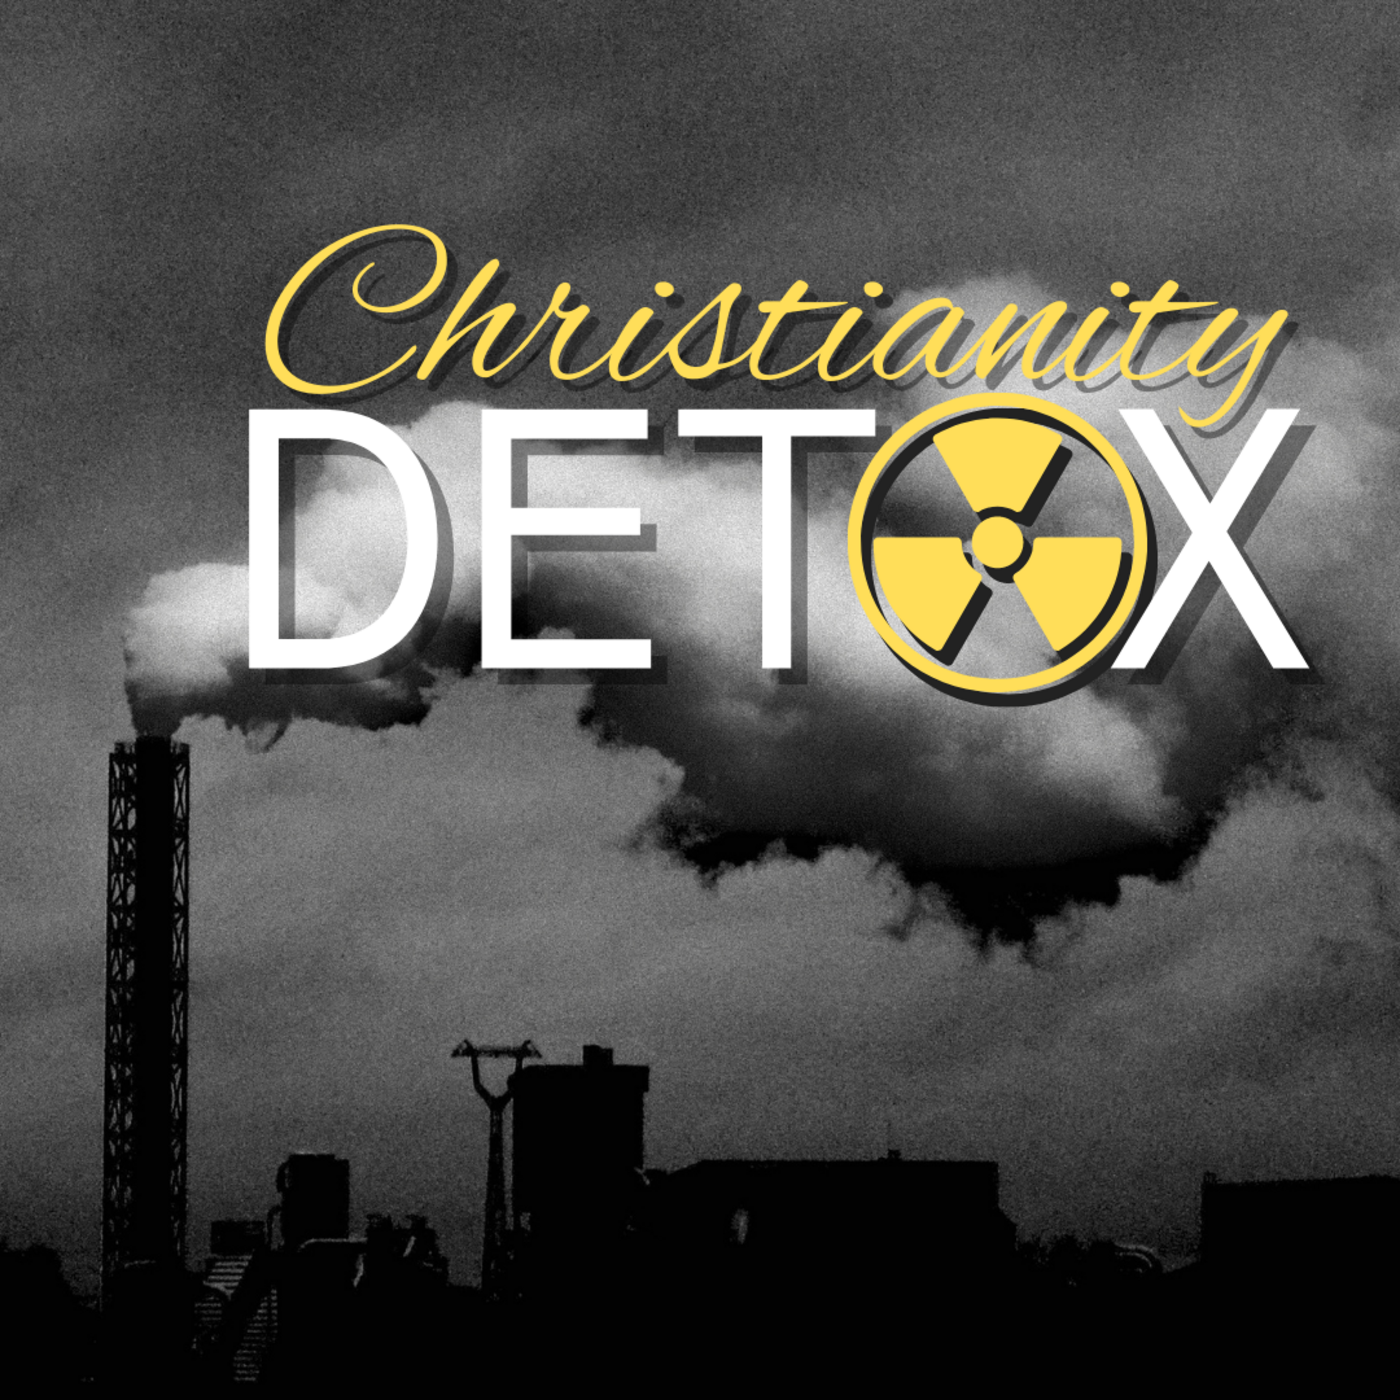 Episode 168: Sky is Falling Christians - Christianity Detox